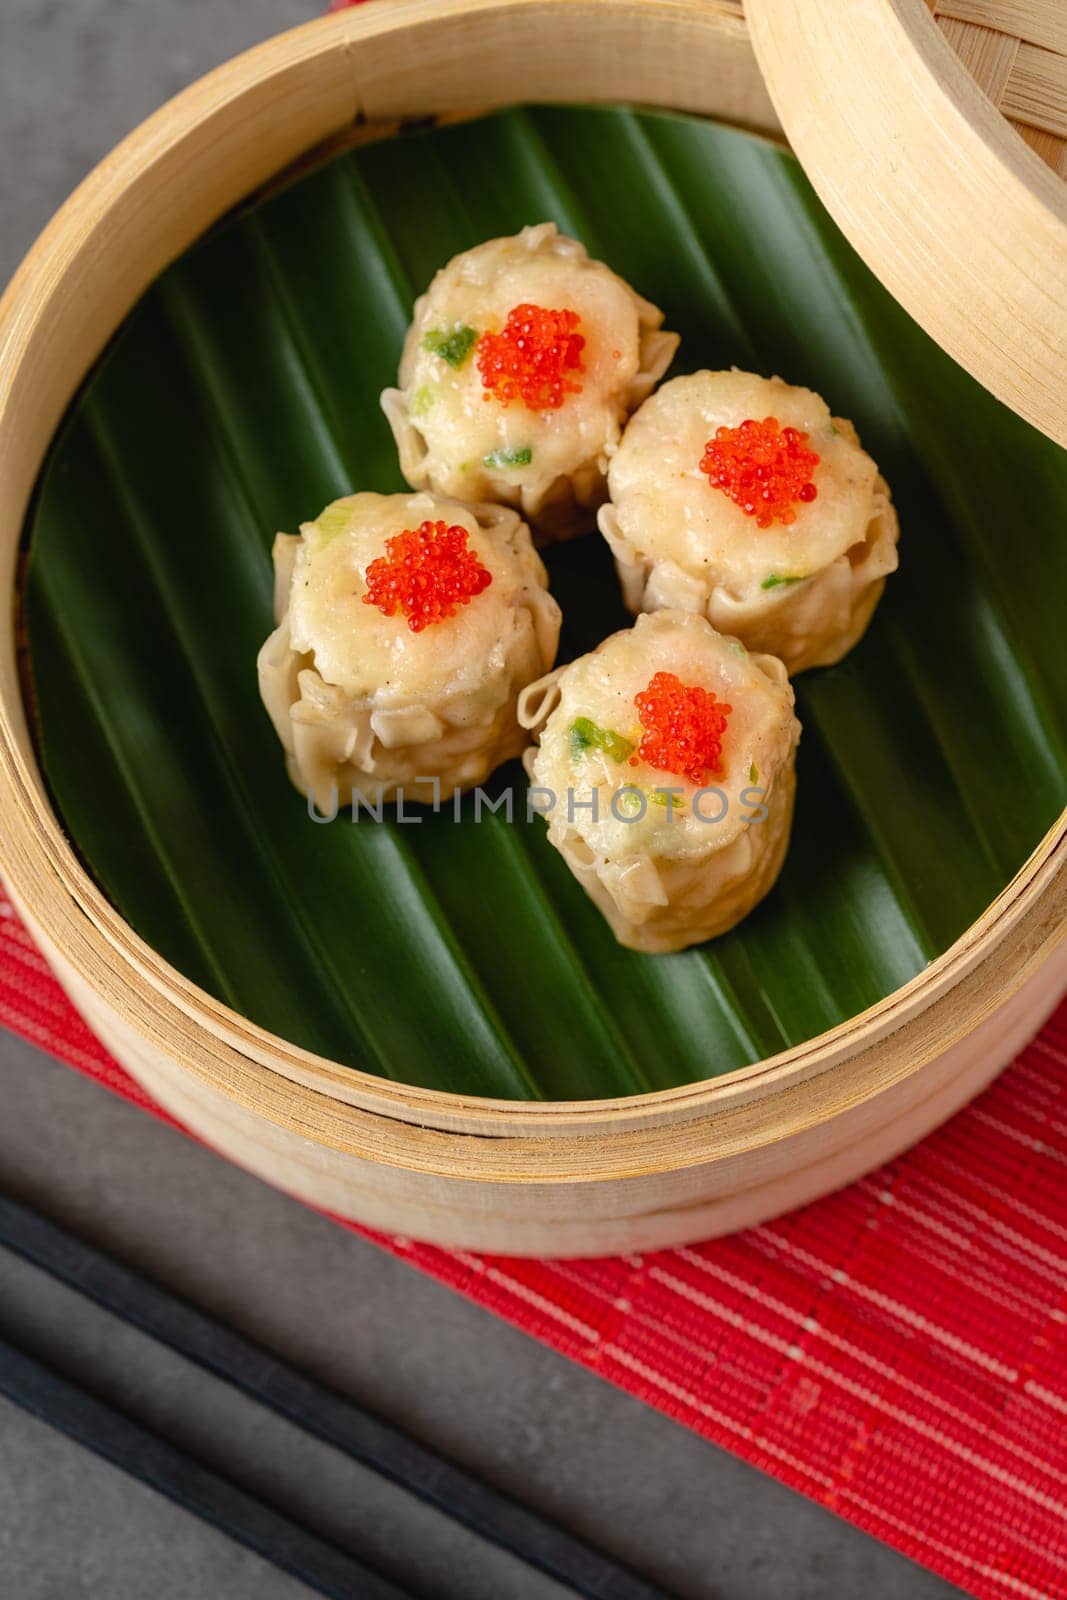 Shumai with shrimp and mushrooms, a traditional Chinese dumpling often served with dim sum by Sonat